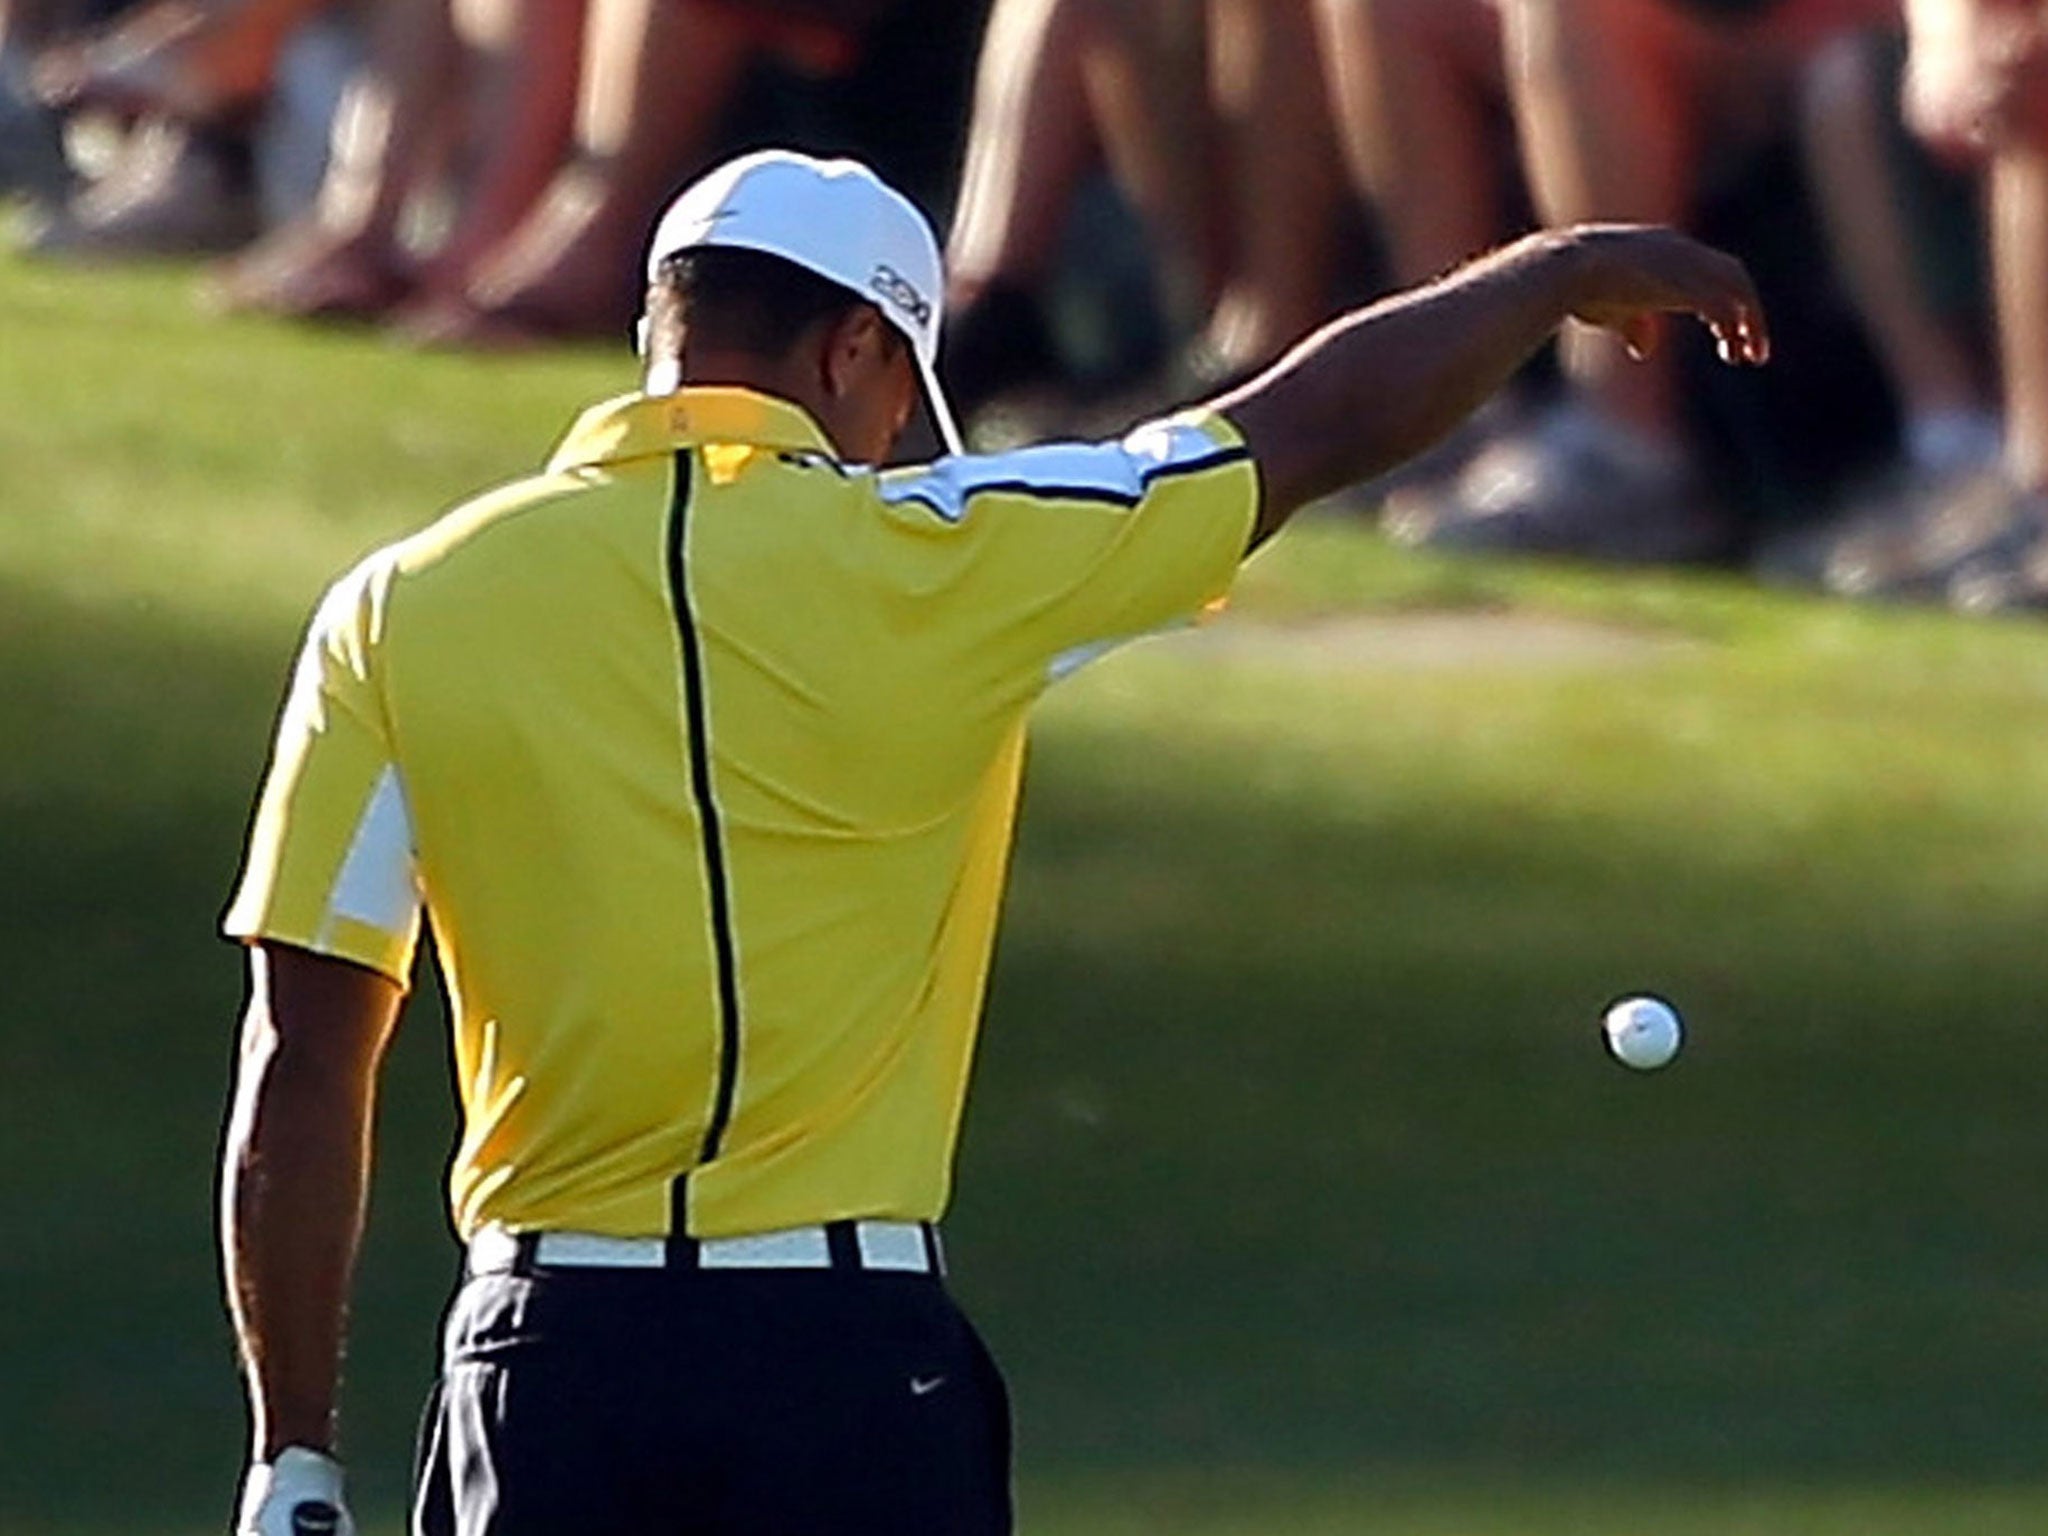 Drop it: Tiger Woods may regret his decision to continue at Augusta